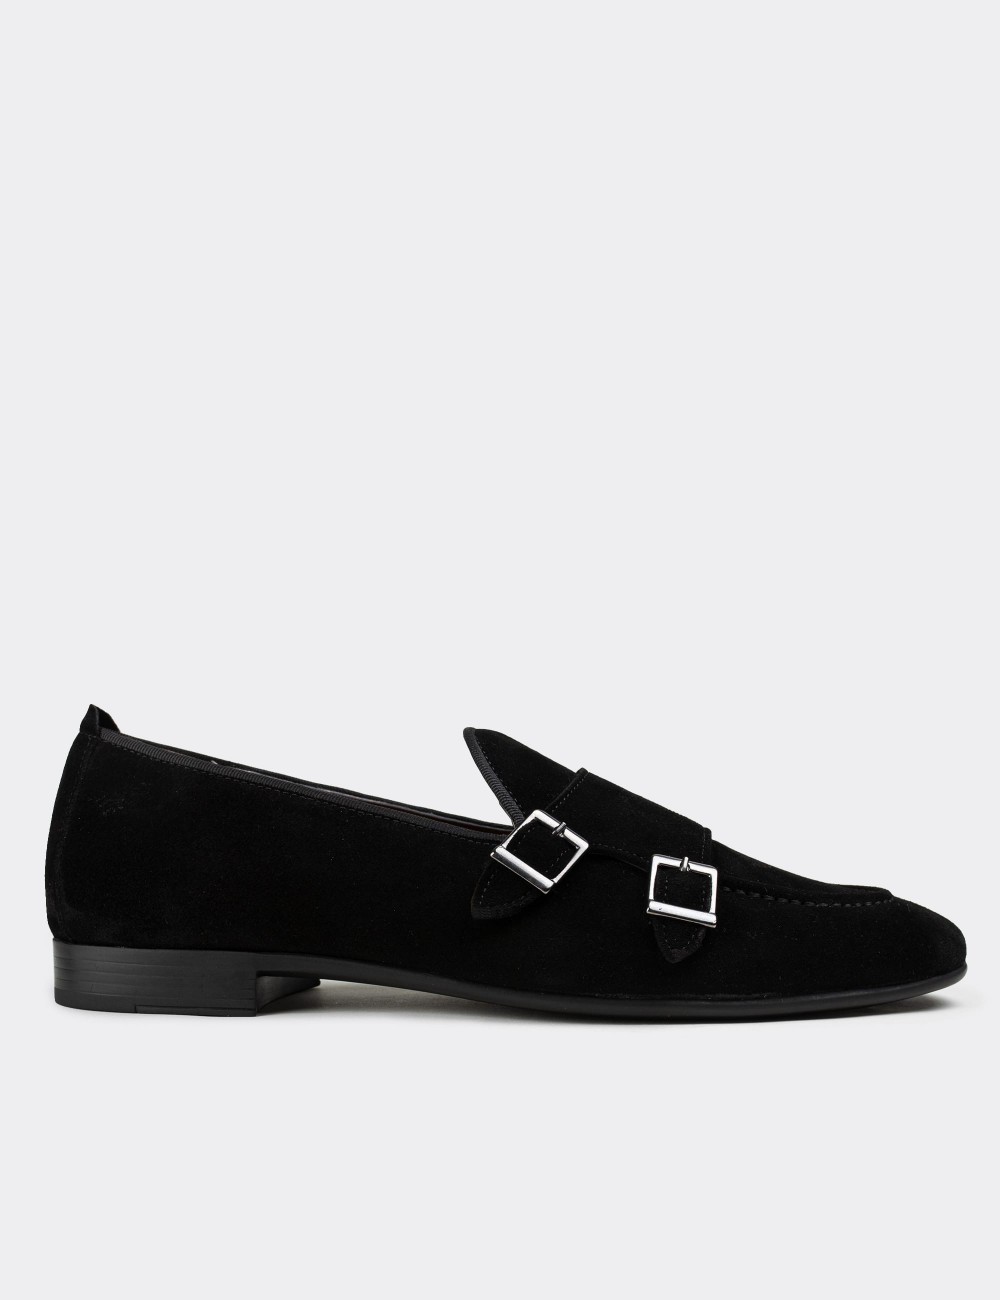 Black Suede Leather Double Monk-Strap Loafers - 01704MSYHC06